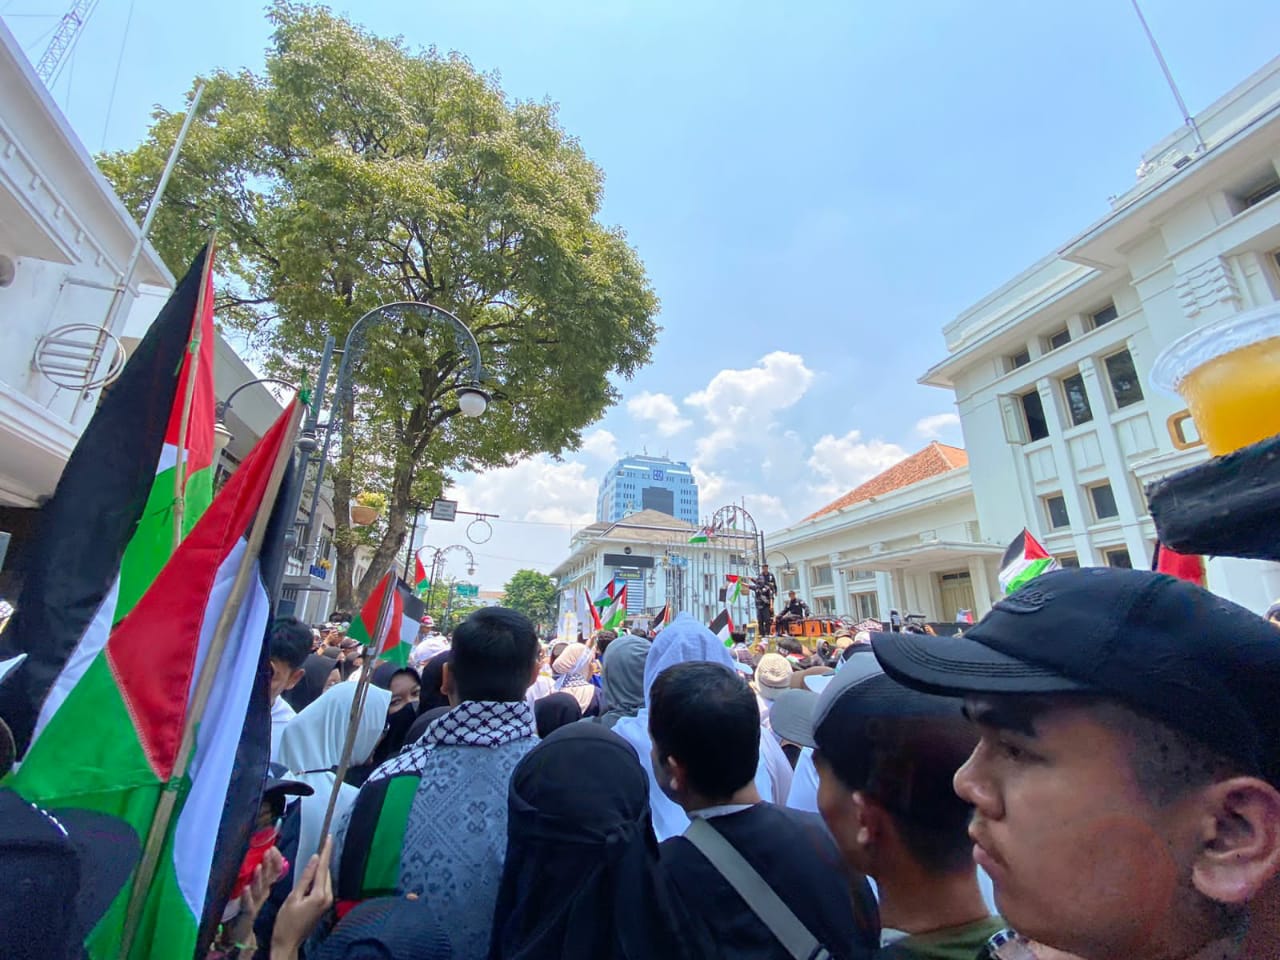 Despite the scorching heat, thousands of Free Palestine protesters still fill the front of Gedung Merdeka